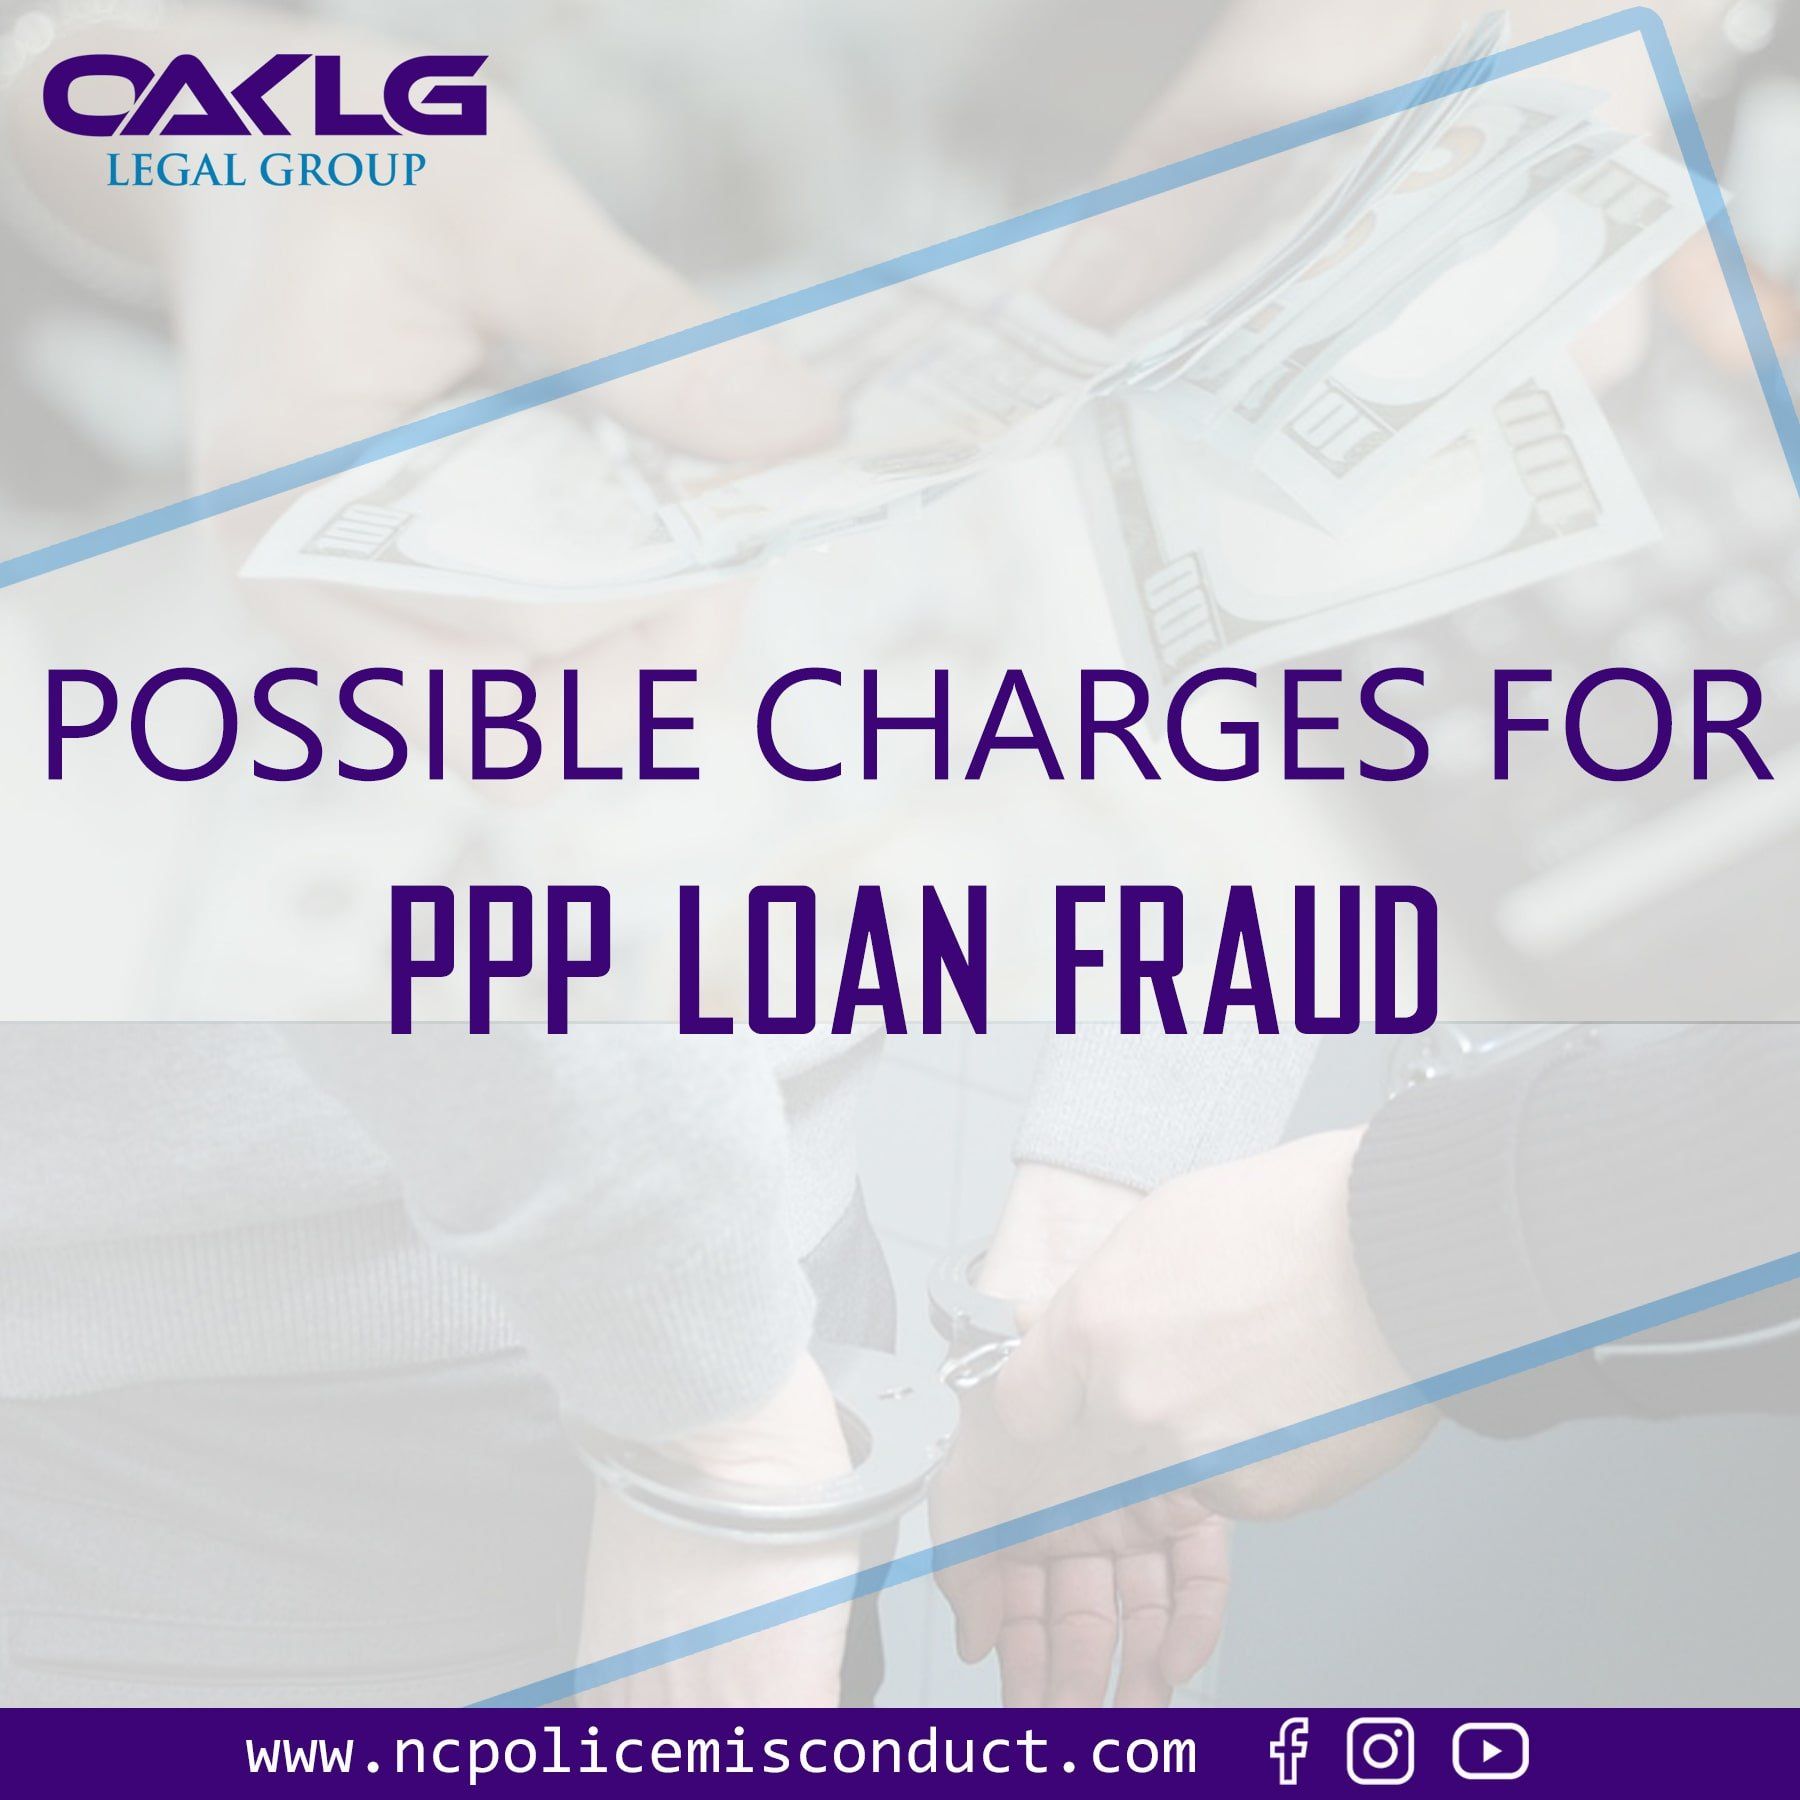 POSSIBLE CHARGES FOR PPP LOAN FRAUD